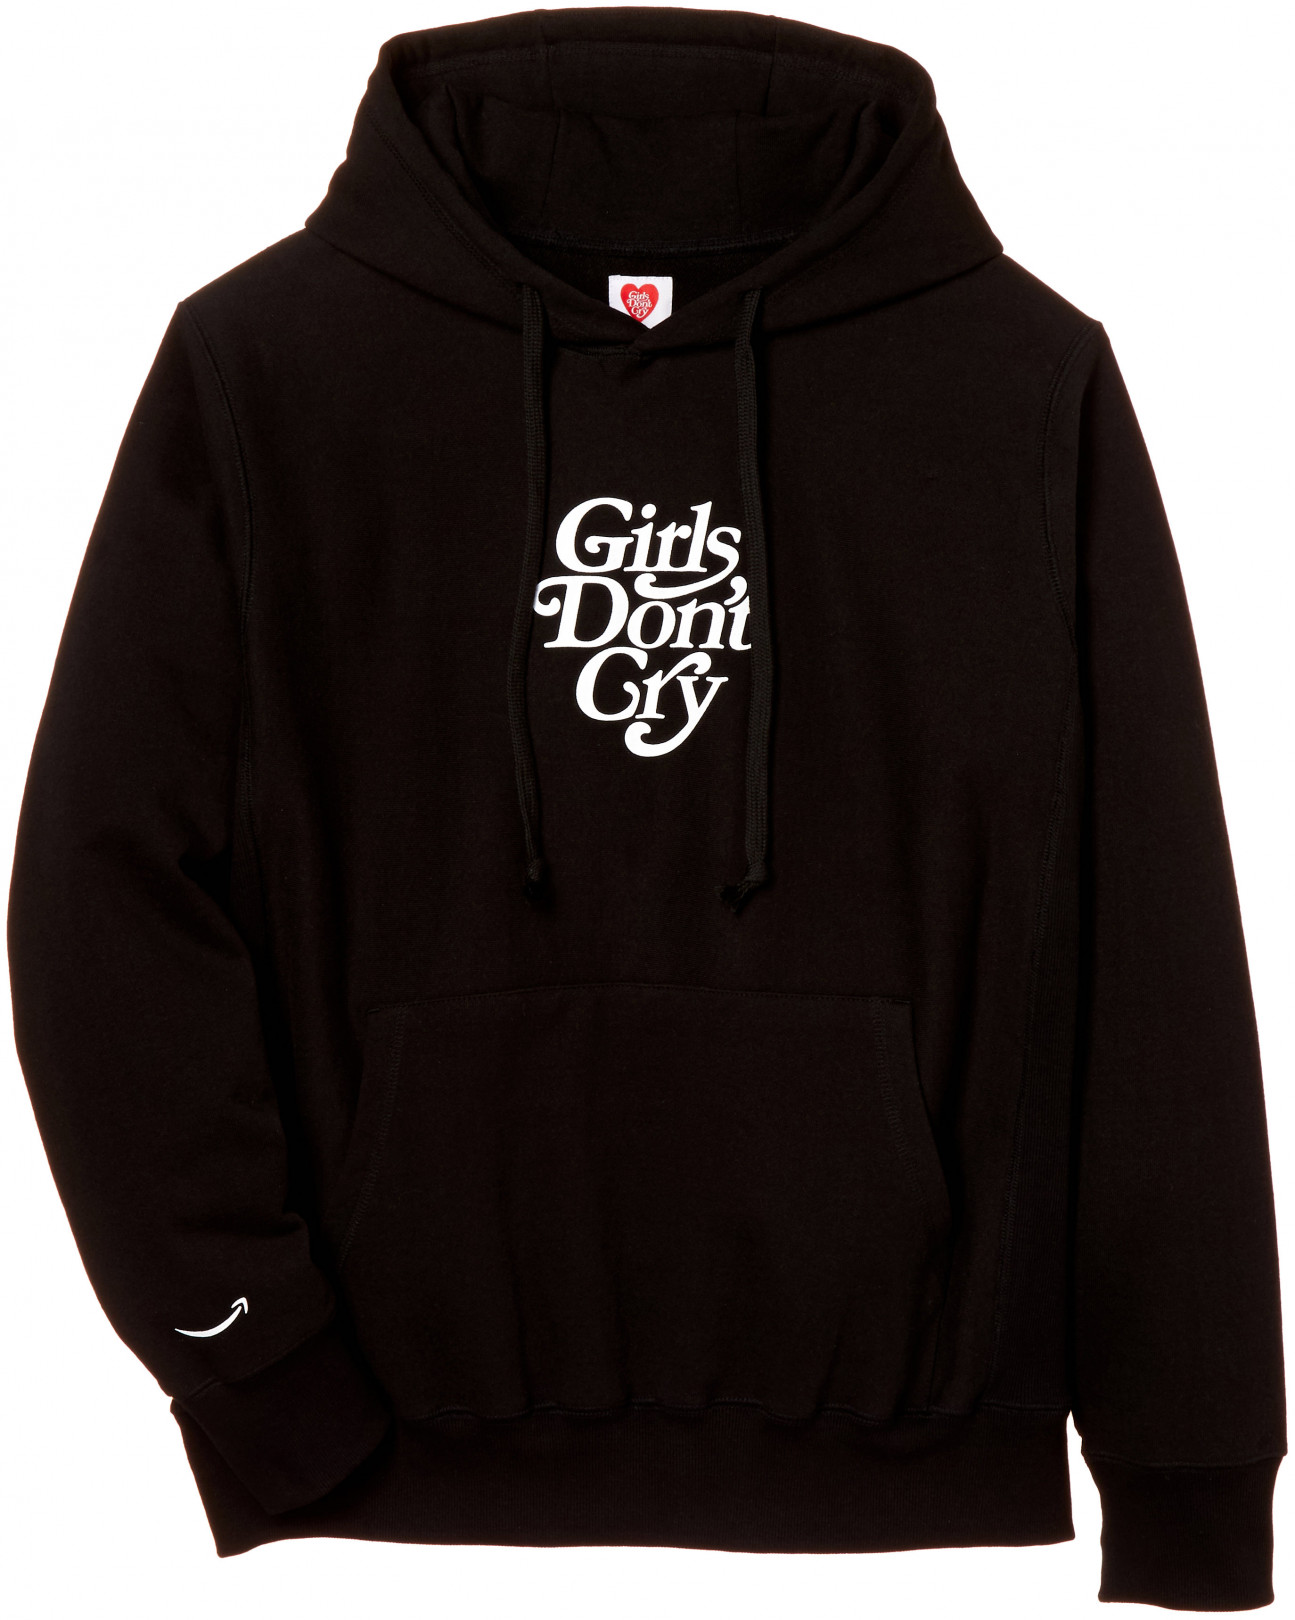 Girls Don’t Cry Meets Amazon Fashion “AT TOKYO" GDC-03 Hoodie（税込2万1,600円）